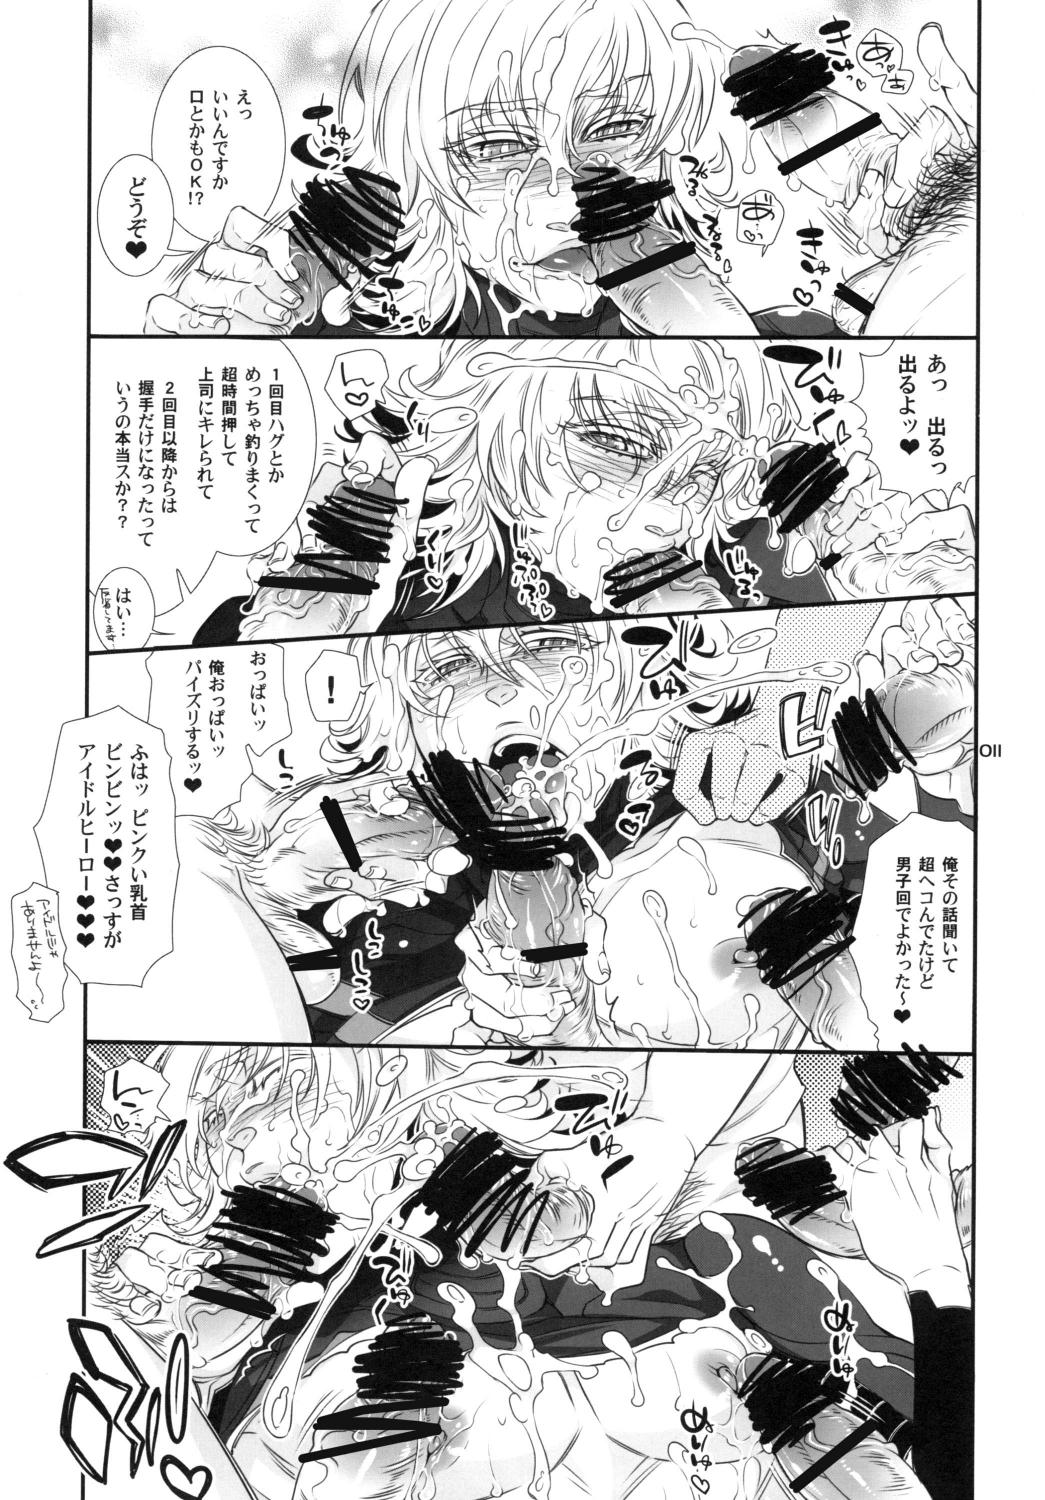 Swing バ○ト69で僕と握手! - Tiger and bunny Gay Friend - Page 11